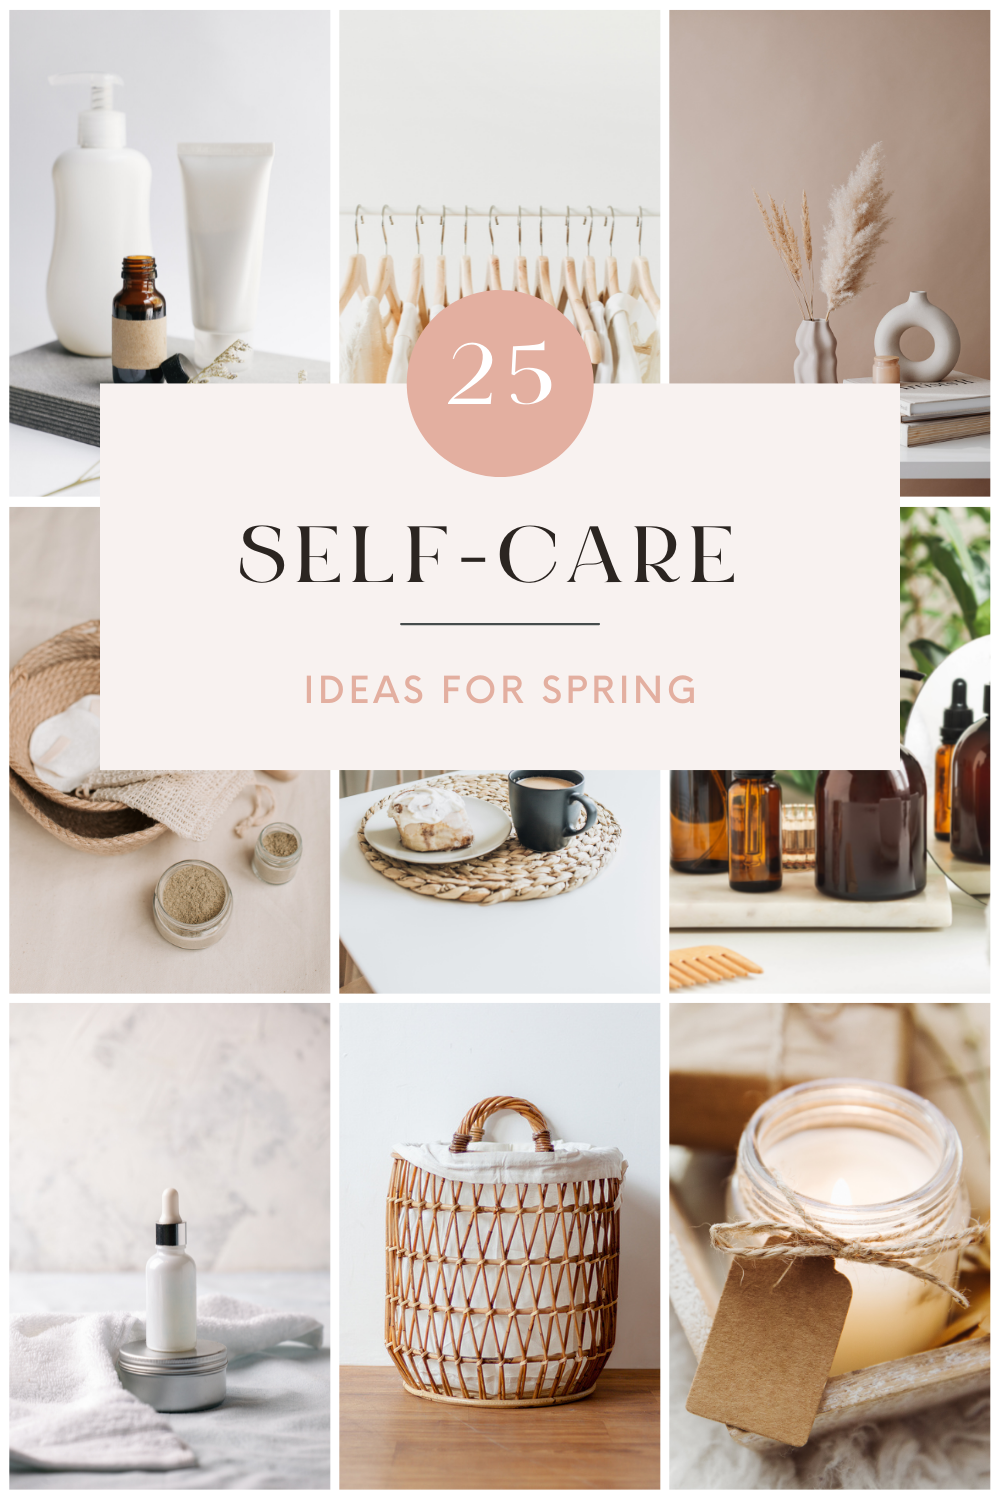 Self-Care Ideas for Spring Pinterest Pin